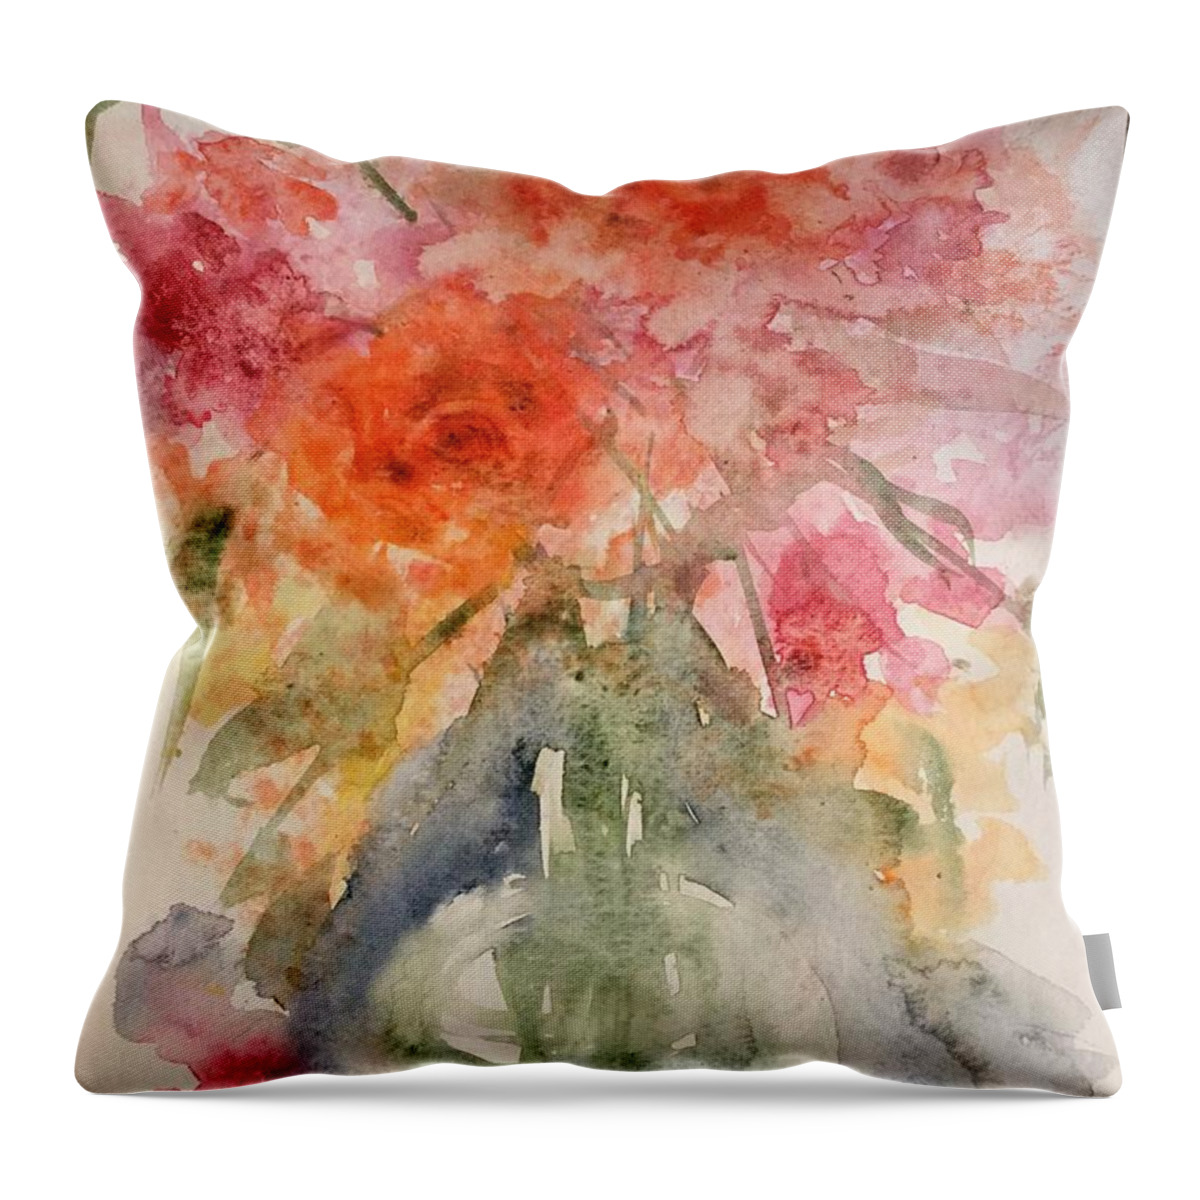 1162019 Throw Pillow featuring the painting 1162019 by Han in Huang wong